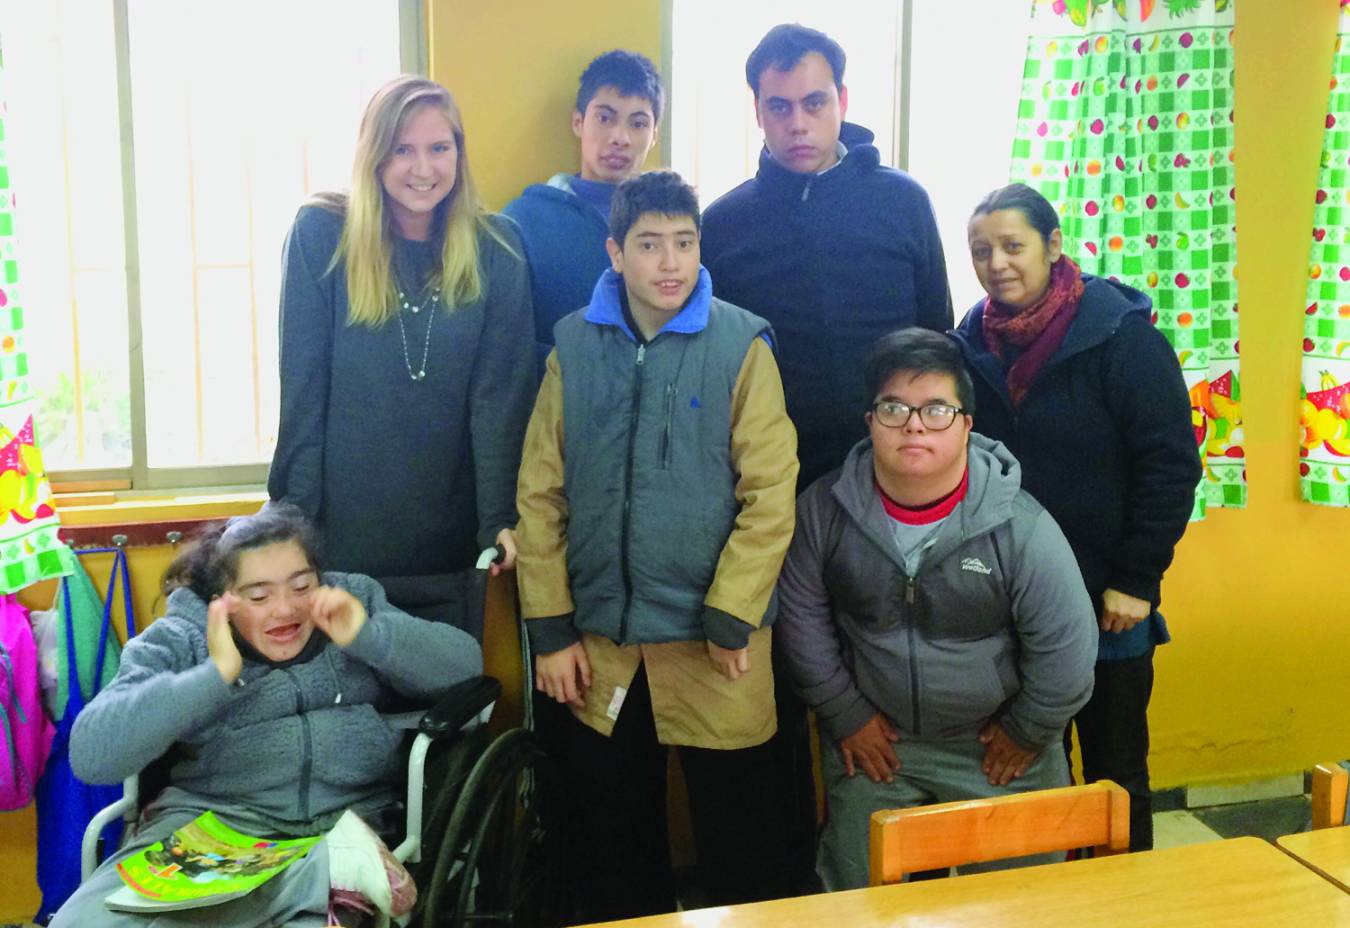 Rector worked with special needs kids in Chile.